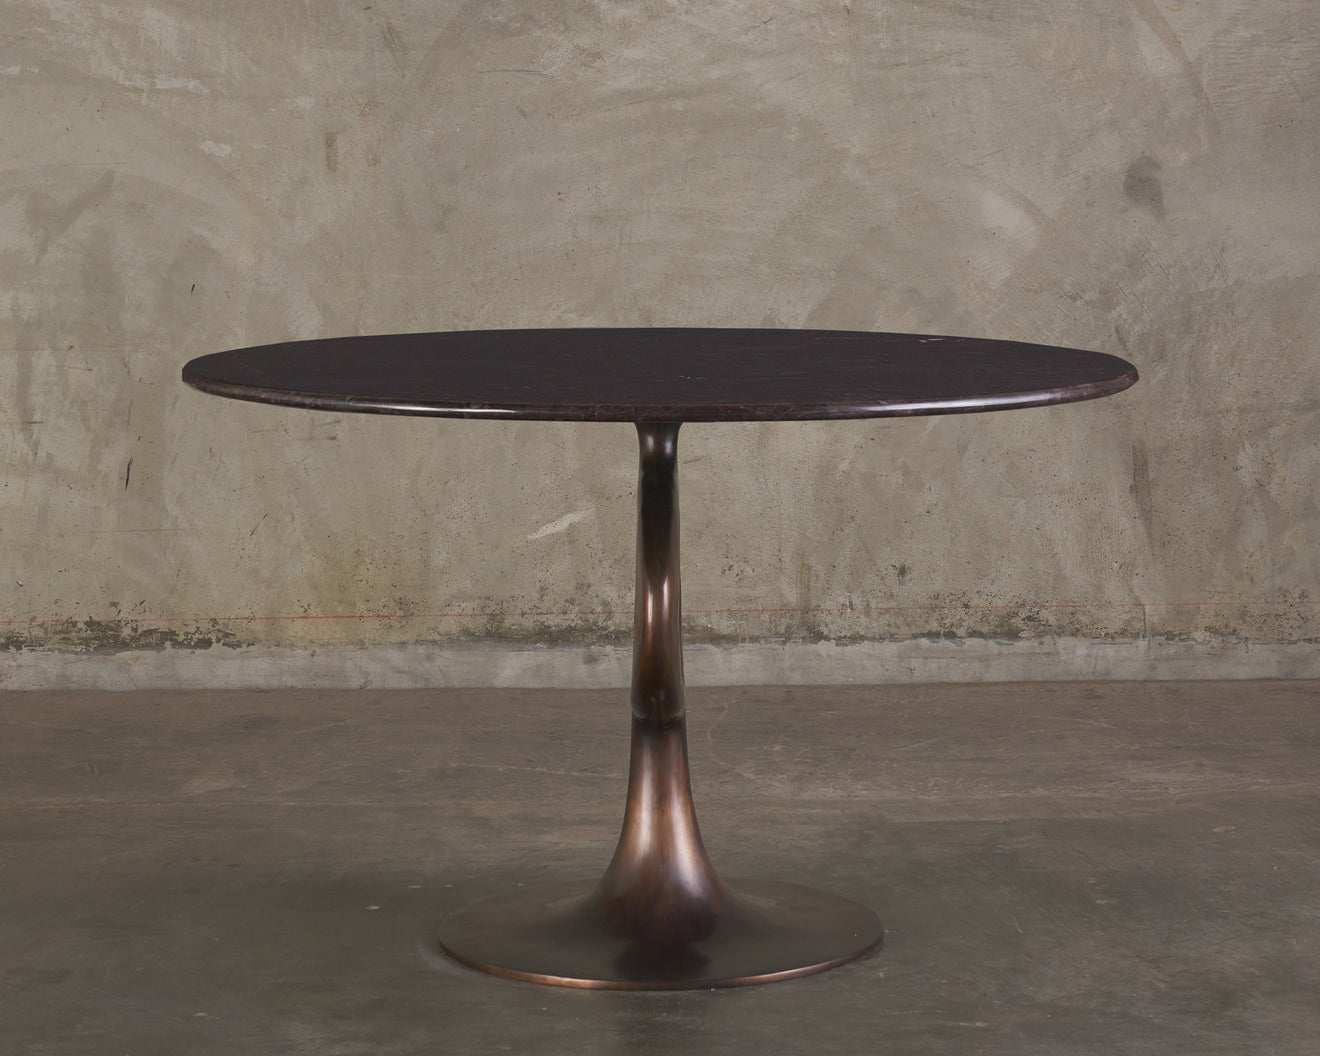 OP ROUND TABLE WITH GRANITE TOP